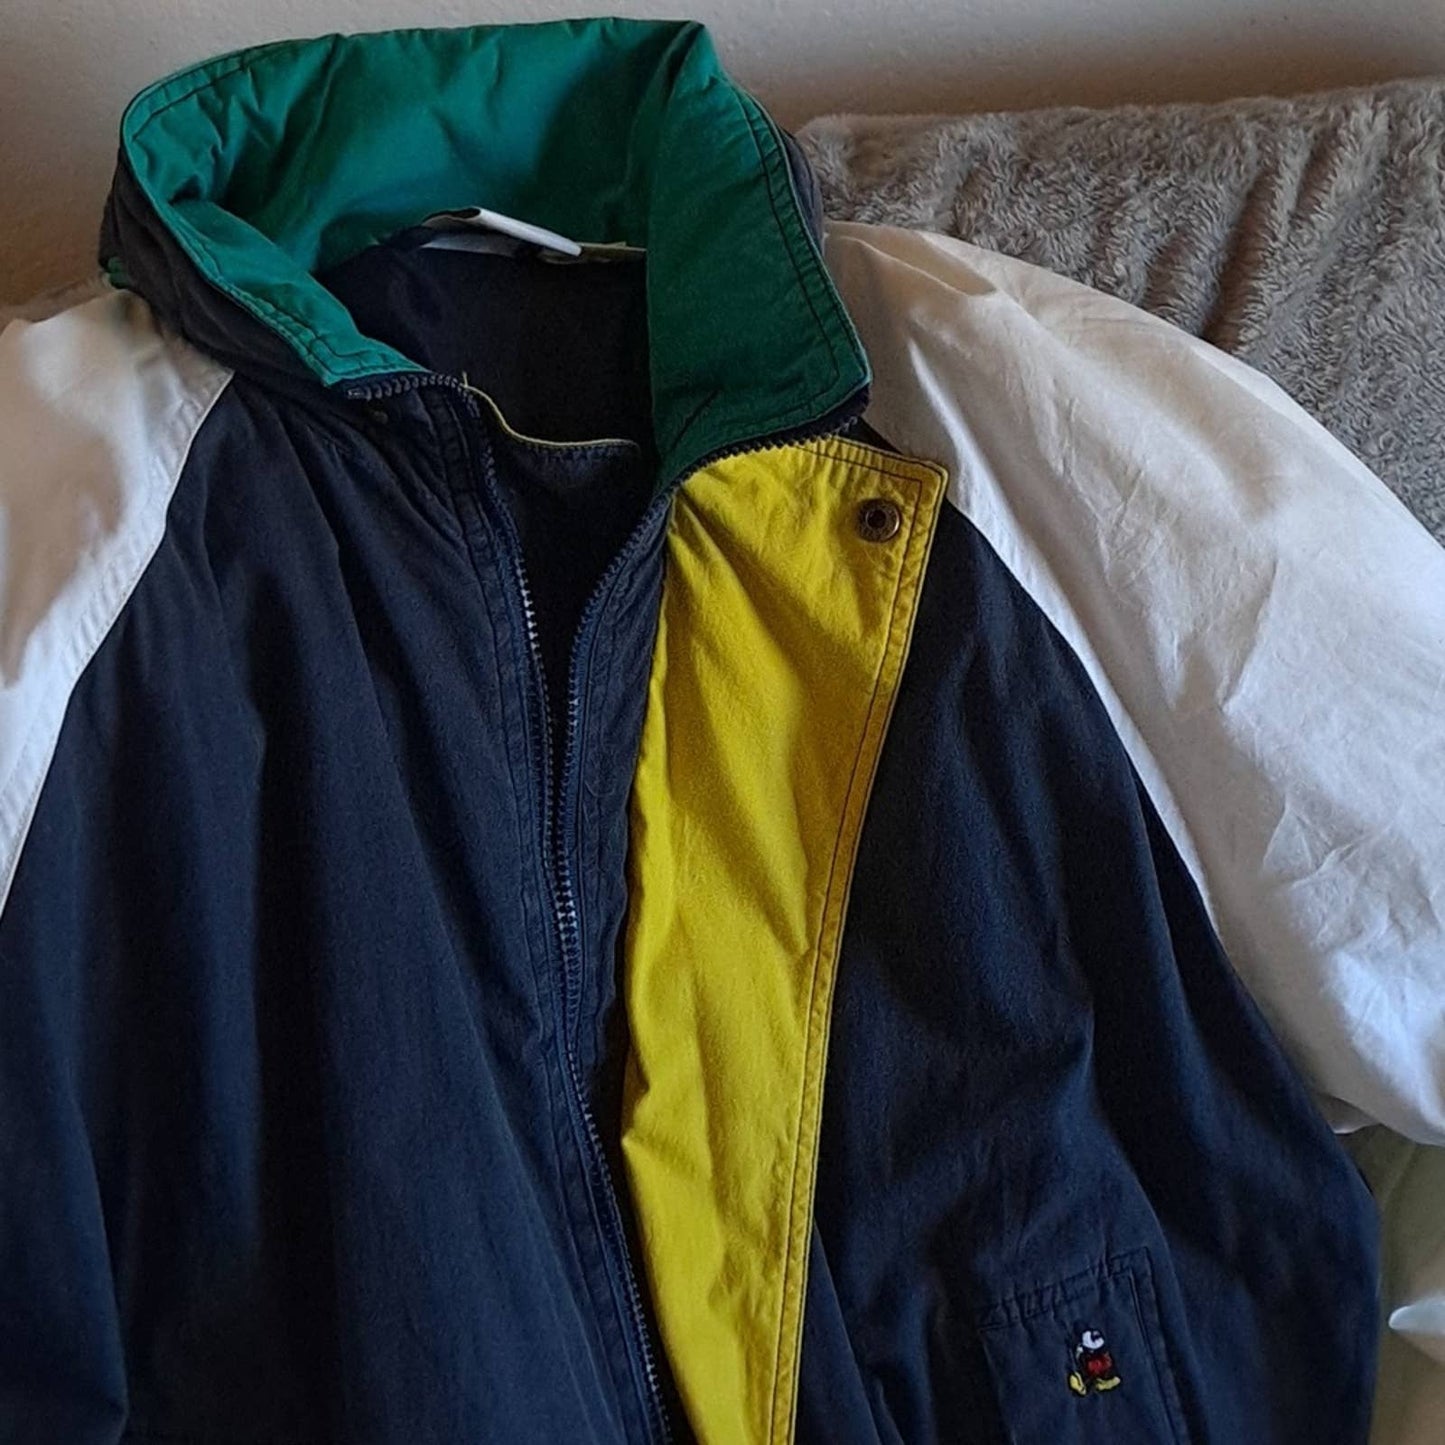 Mickey  multi-colored lined windbreaker with hidden hood. Used but in good shape. LG